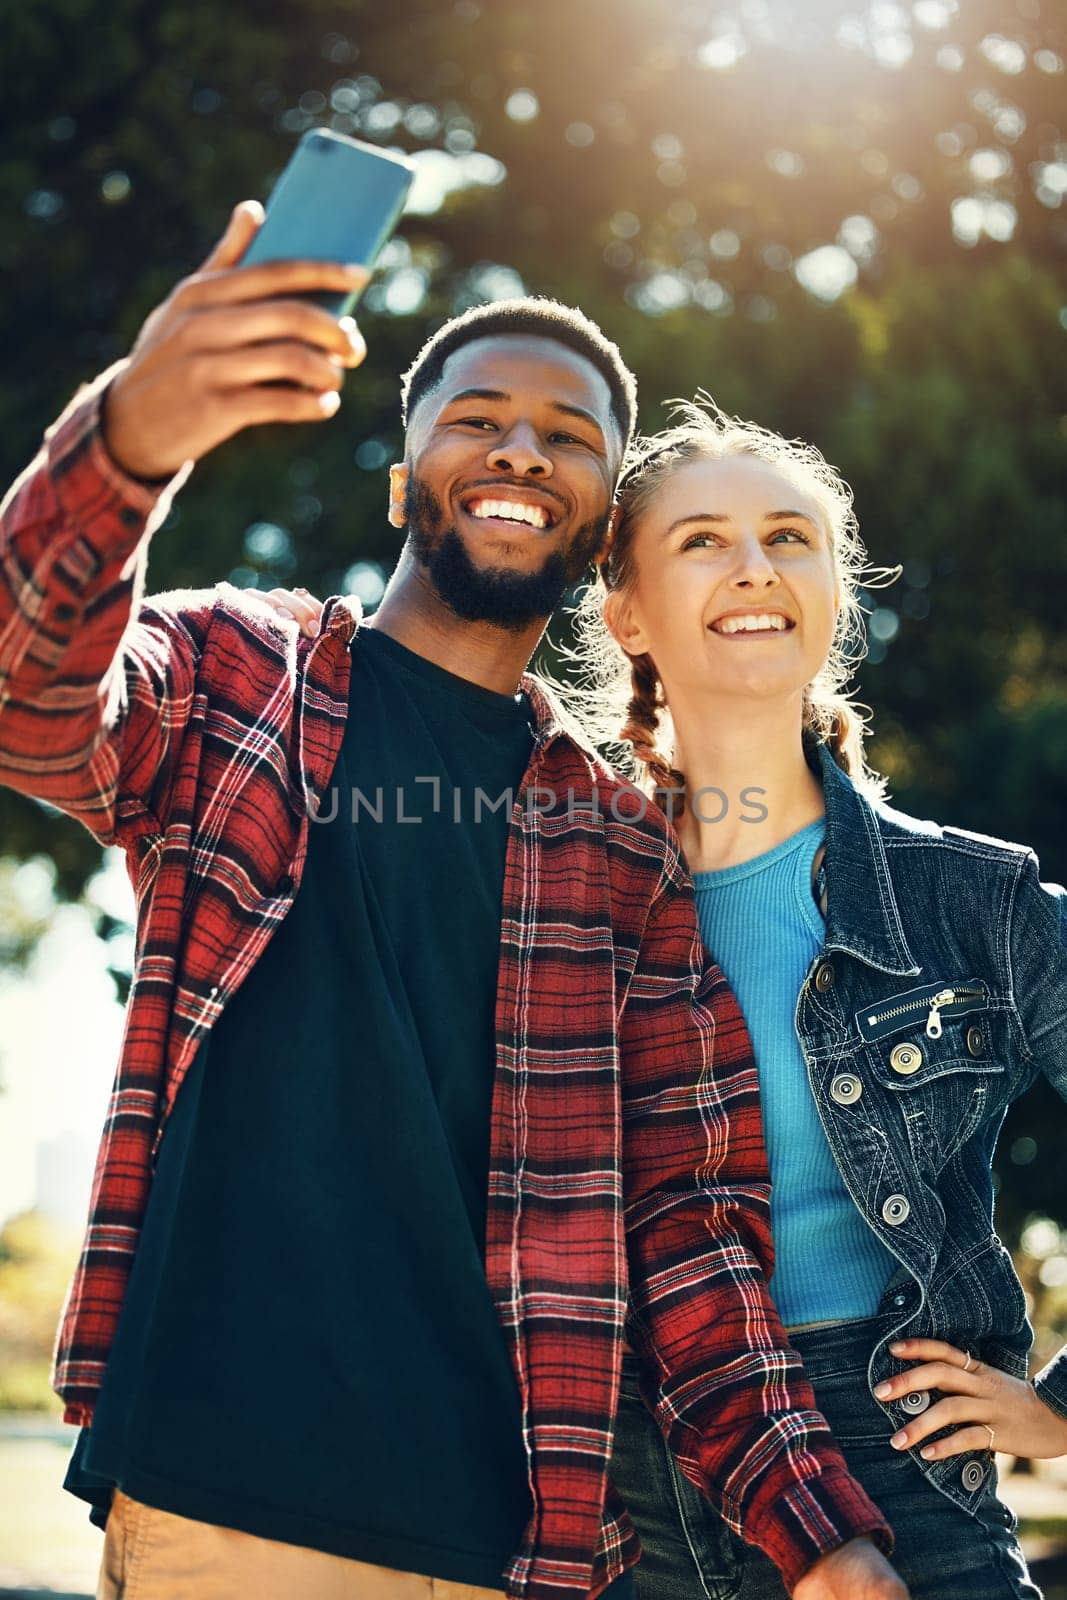 Selfie, love and happy couple on an outdoor date for their anniversary or romance together. Happiness, smile and interracial man and woman taking picture on a phone while on a walk in park in nature